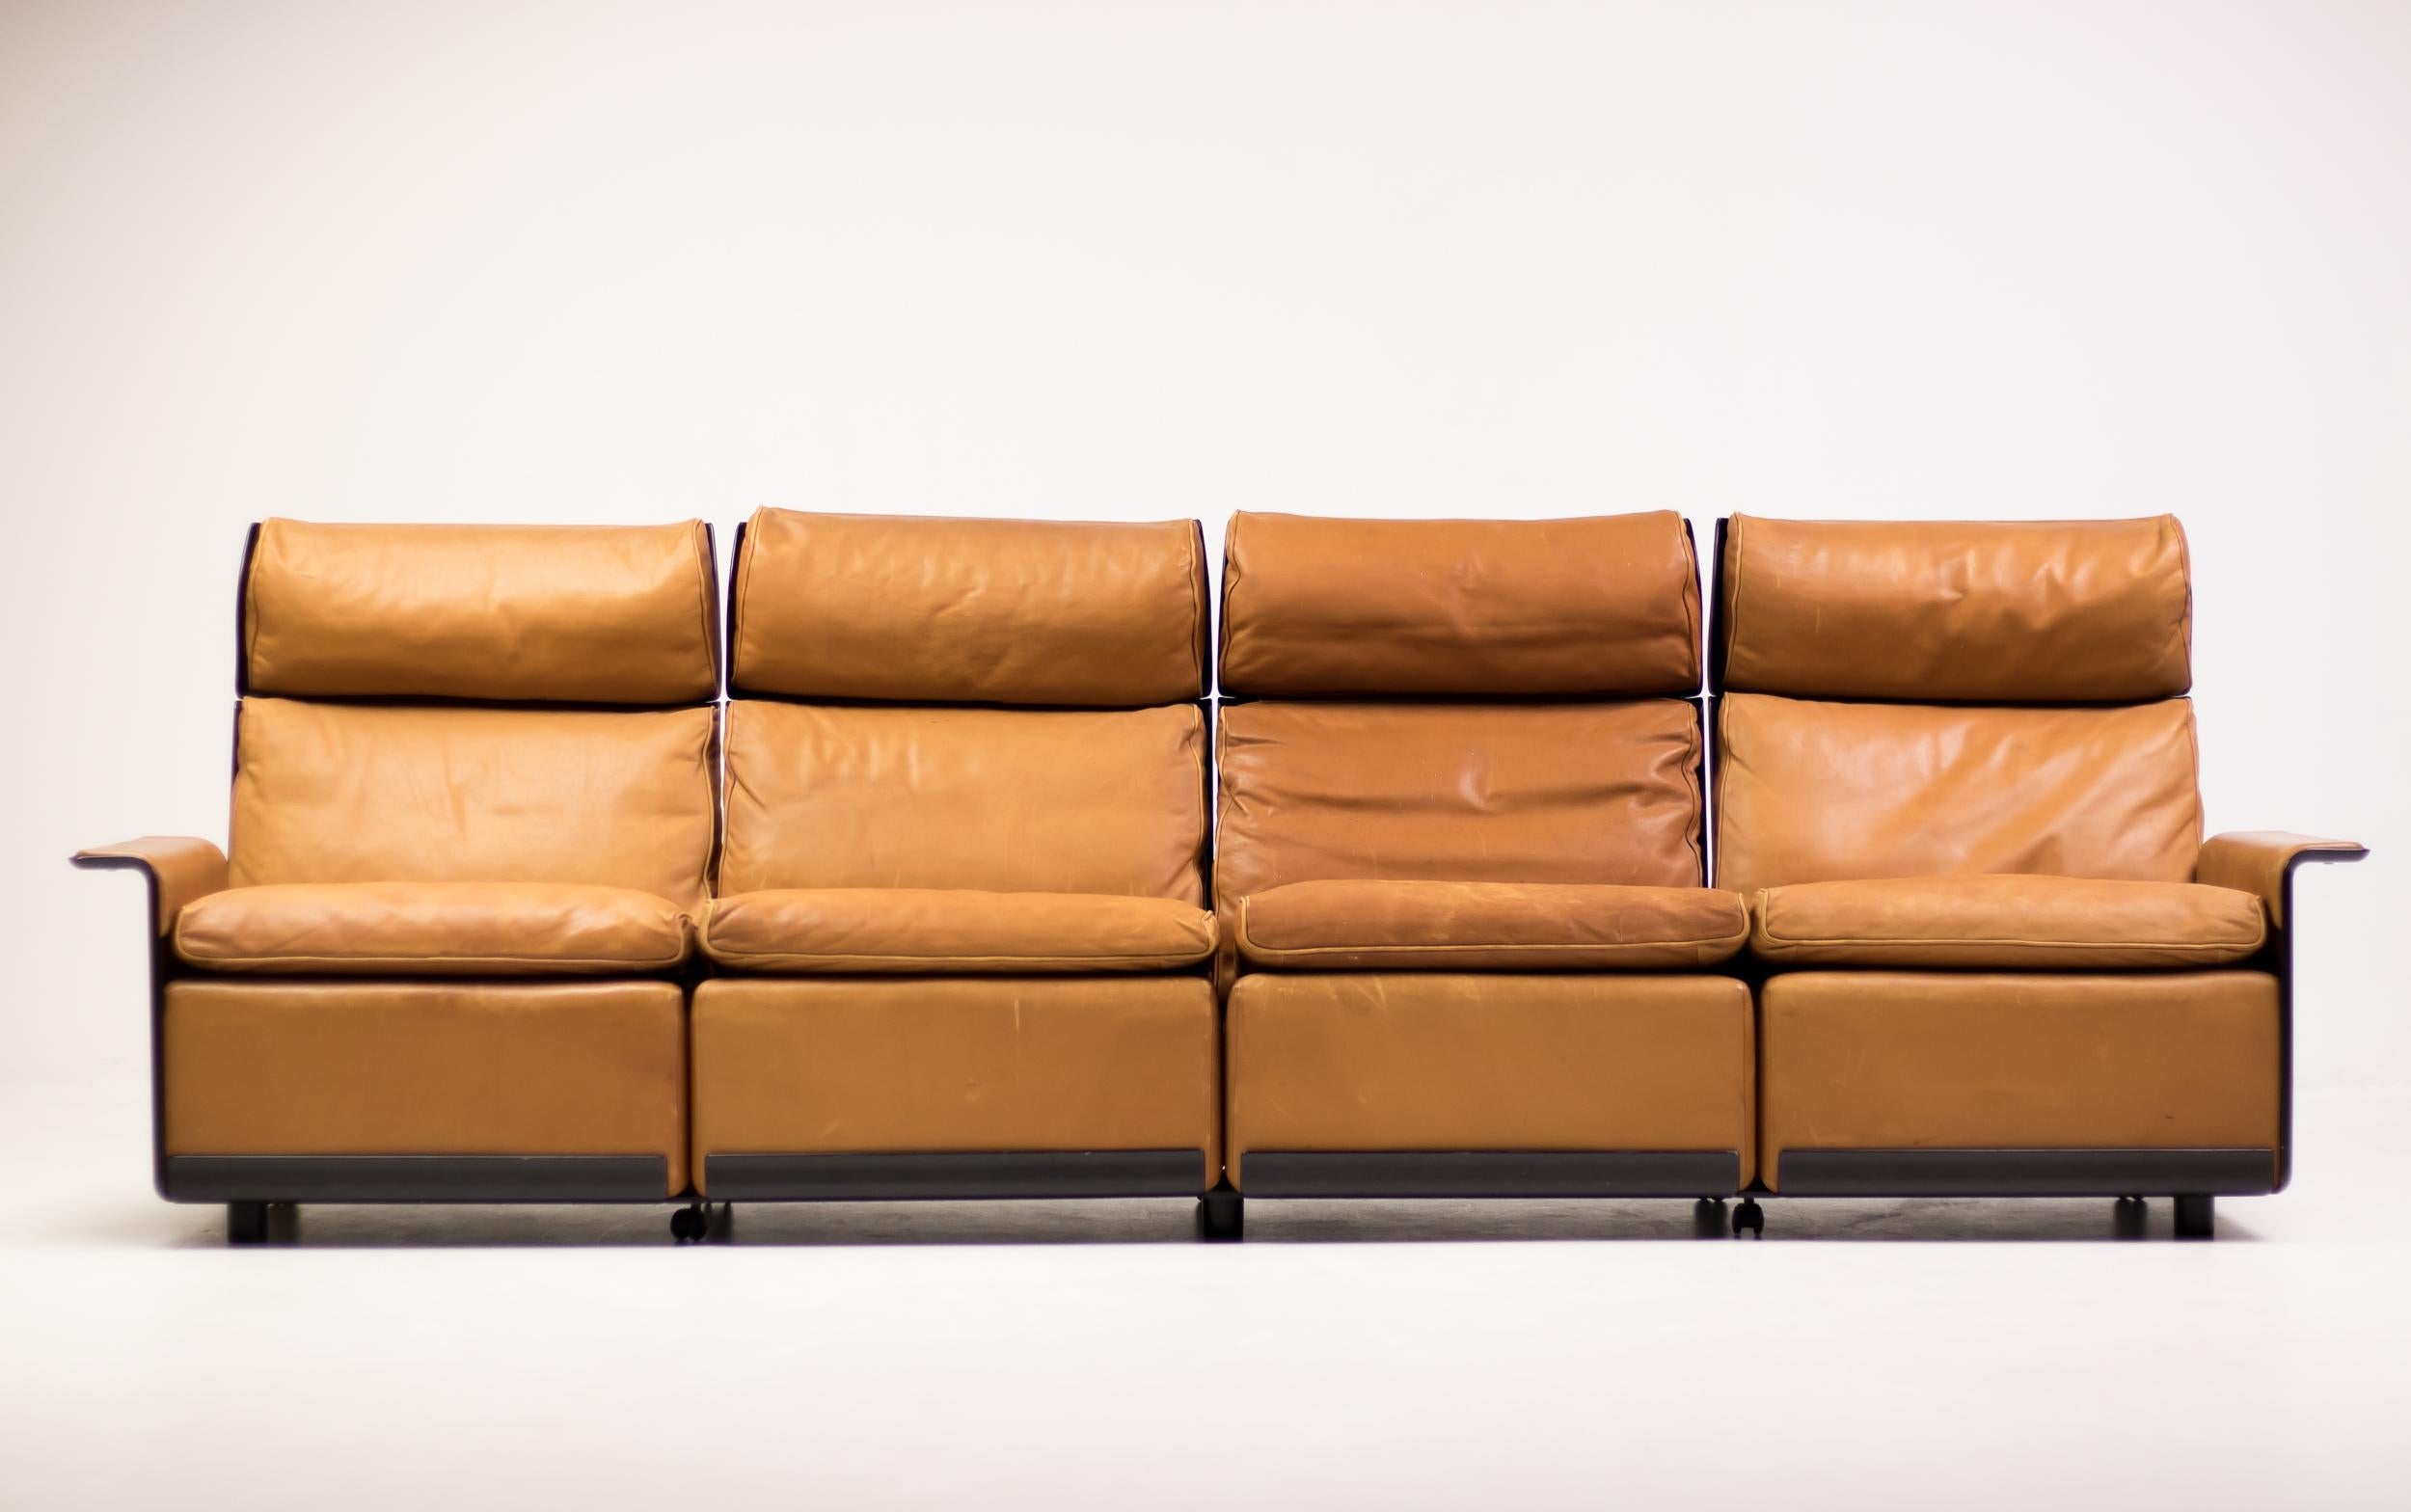 RZ620 four-seat sofa in cognac leather and black fiberglass by Dieter Rams for Vitsoe. 
Rare Dieter Rams piece in all original condition. 
Small tear in one of the armrests, but that piece of leather can easily be replaced when required.